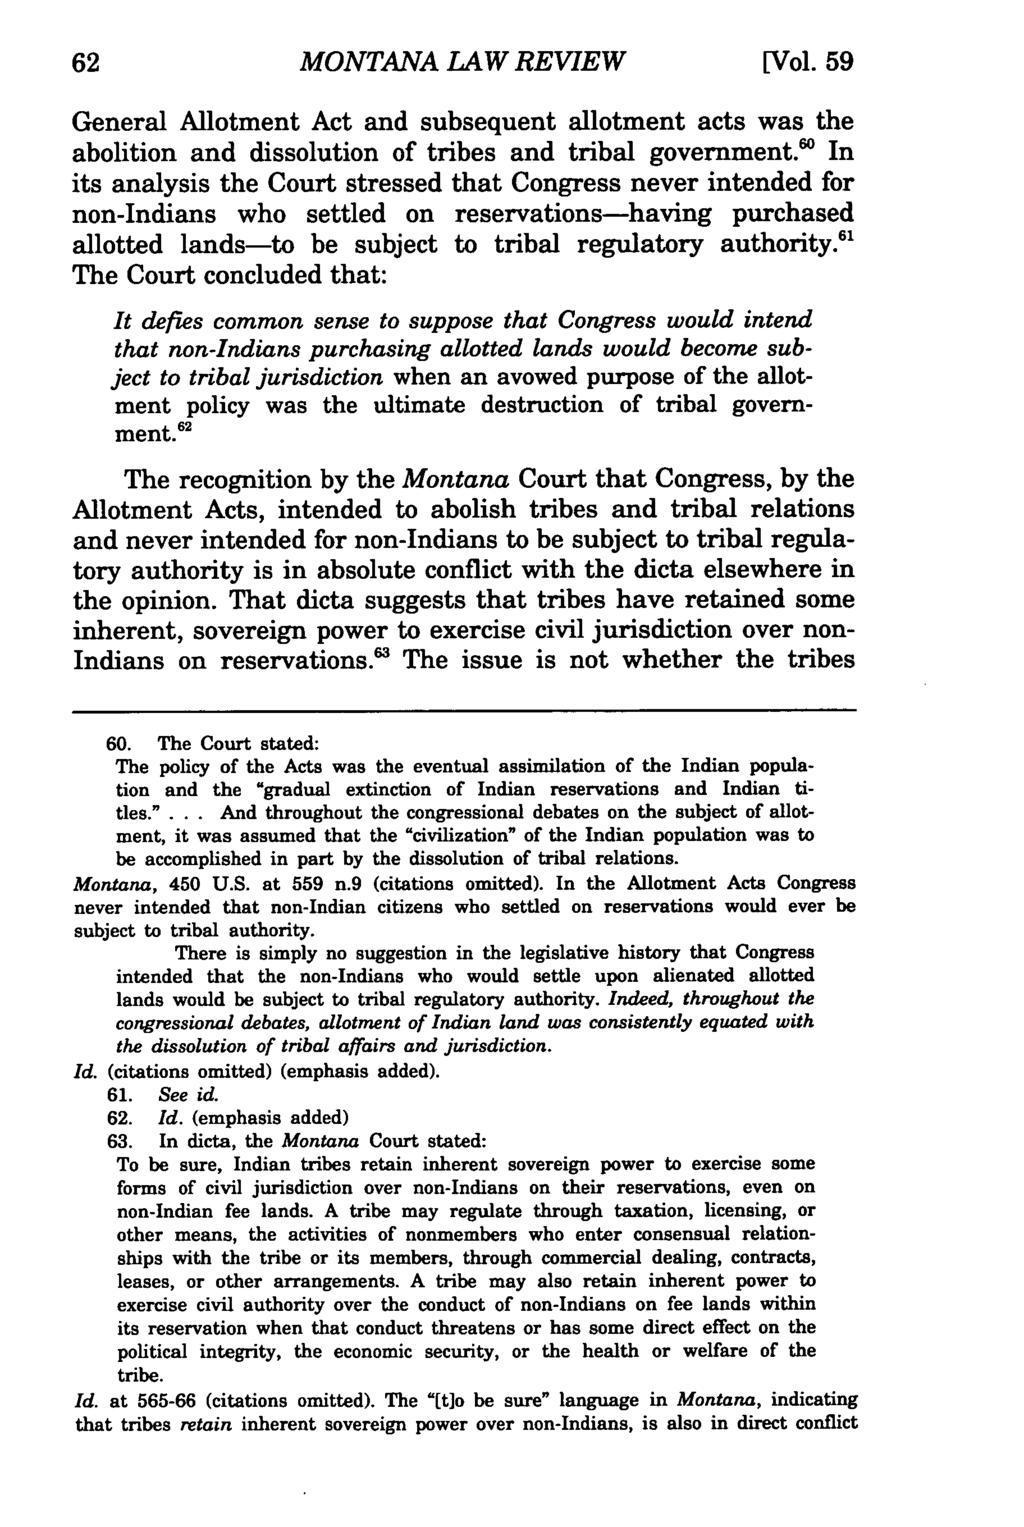 62 Montana MONTANA Law Review, LAW Vol. REVIEW 59 [1998], Iss. 1, Art. 4 [Vol. 59 General Allotment Act and subsequent allotment acts was the abolition and dissolution of tribes and tribal government.